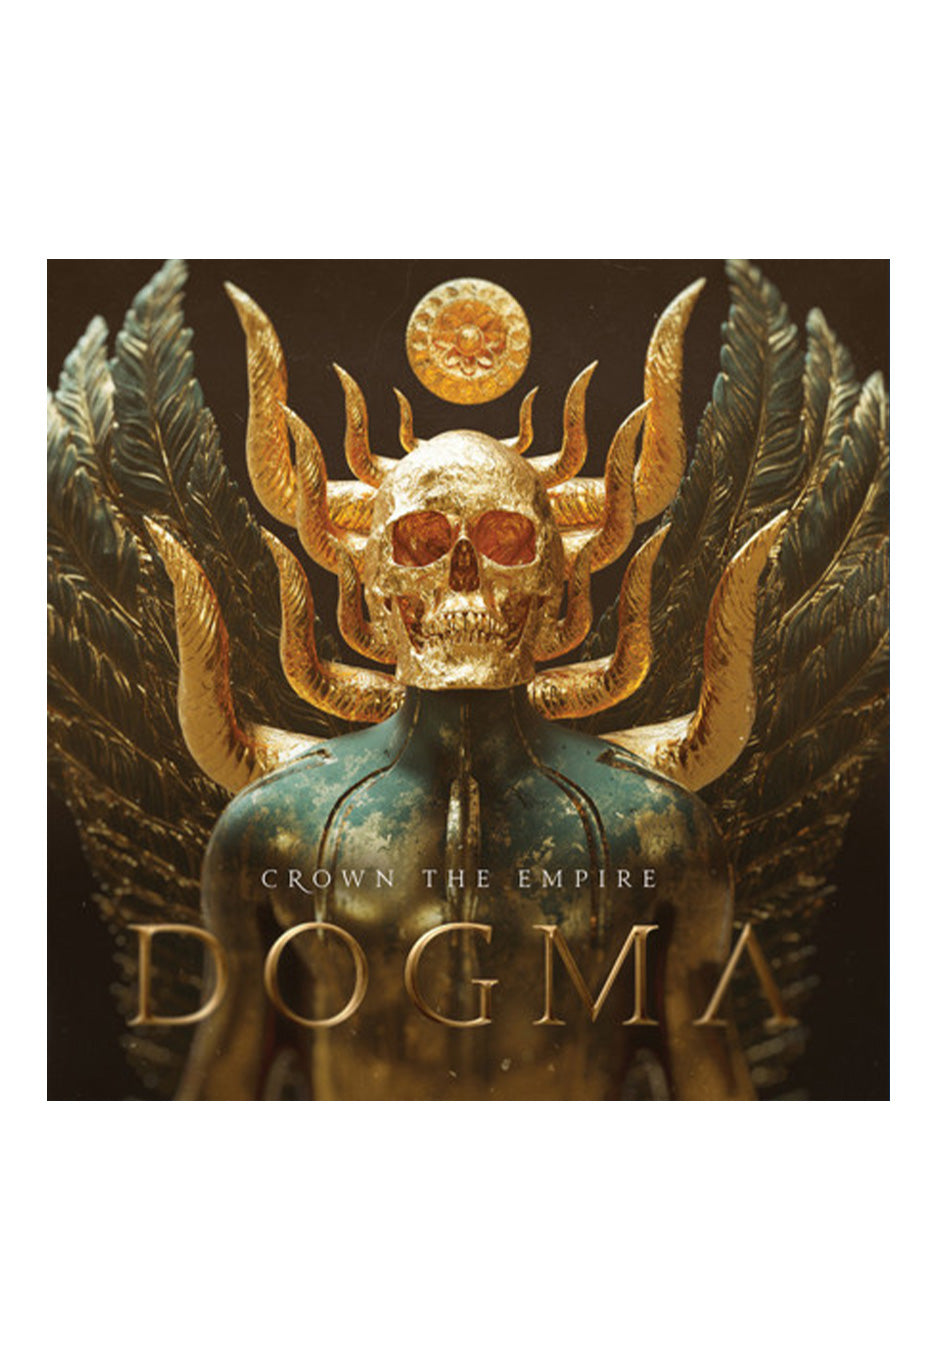 Crown The Empire - Dogma - Vinyl | Neutral-Image